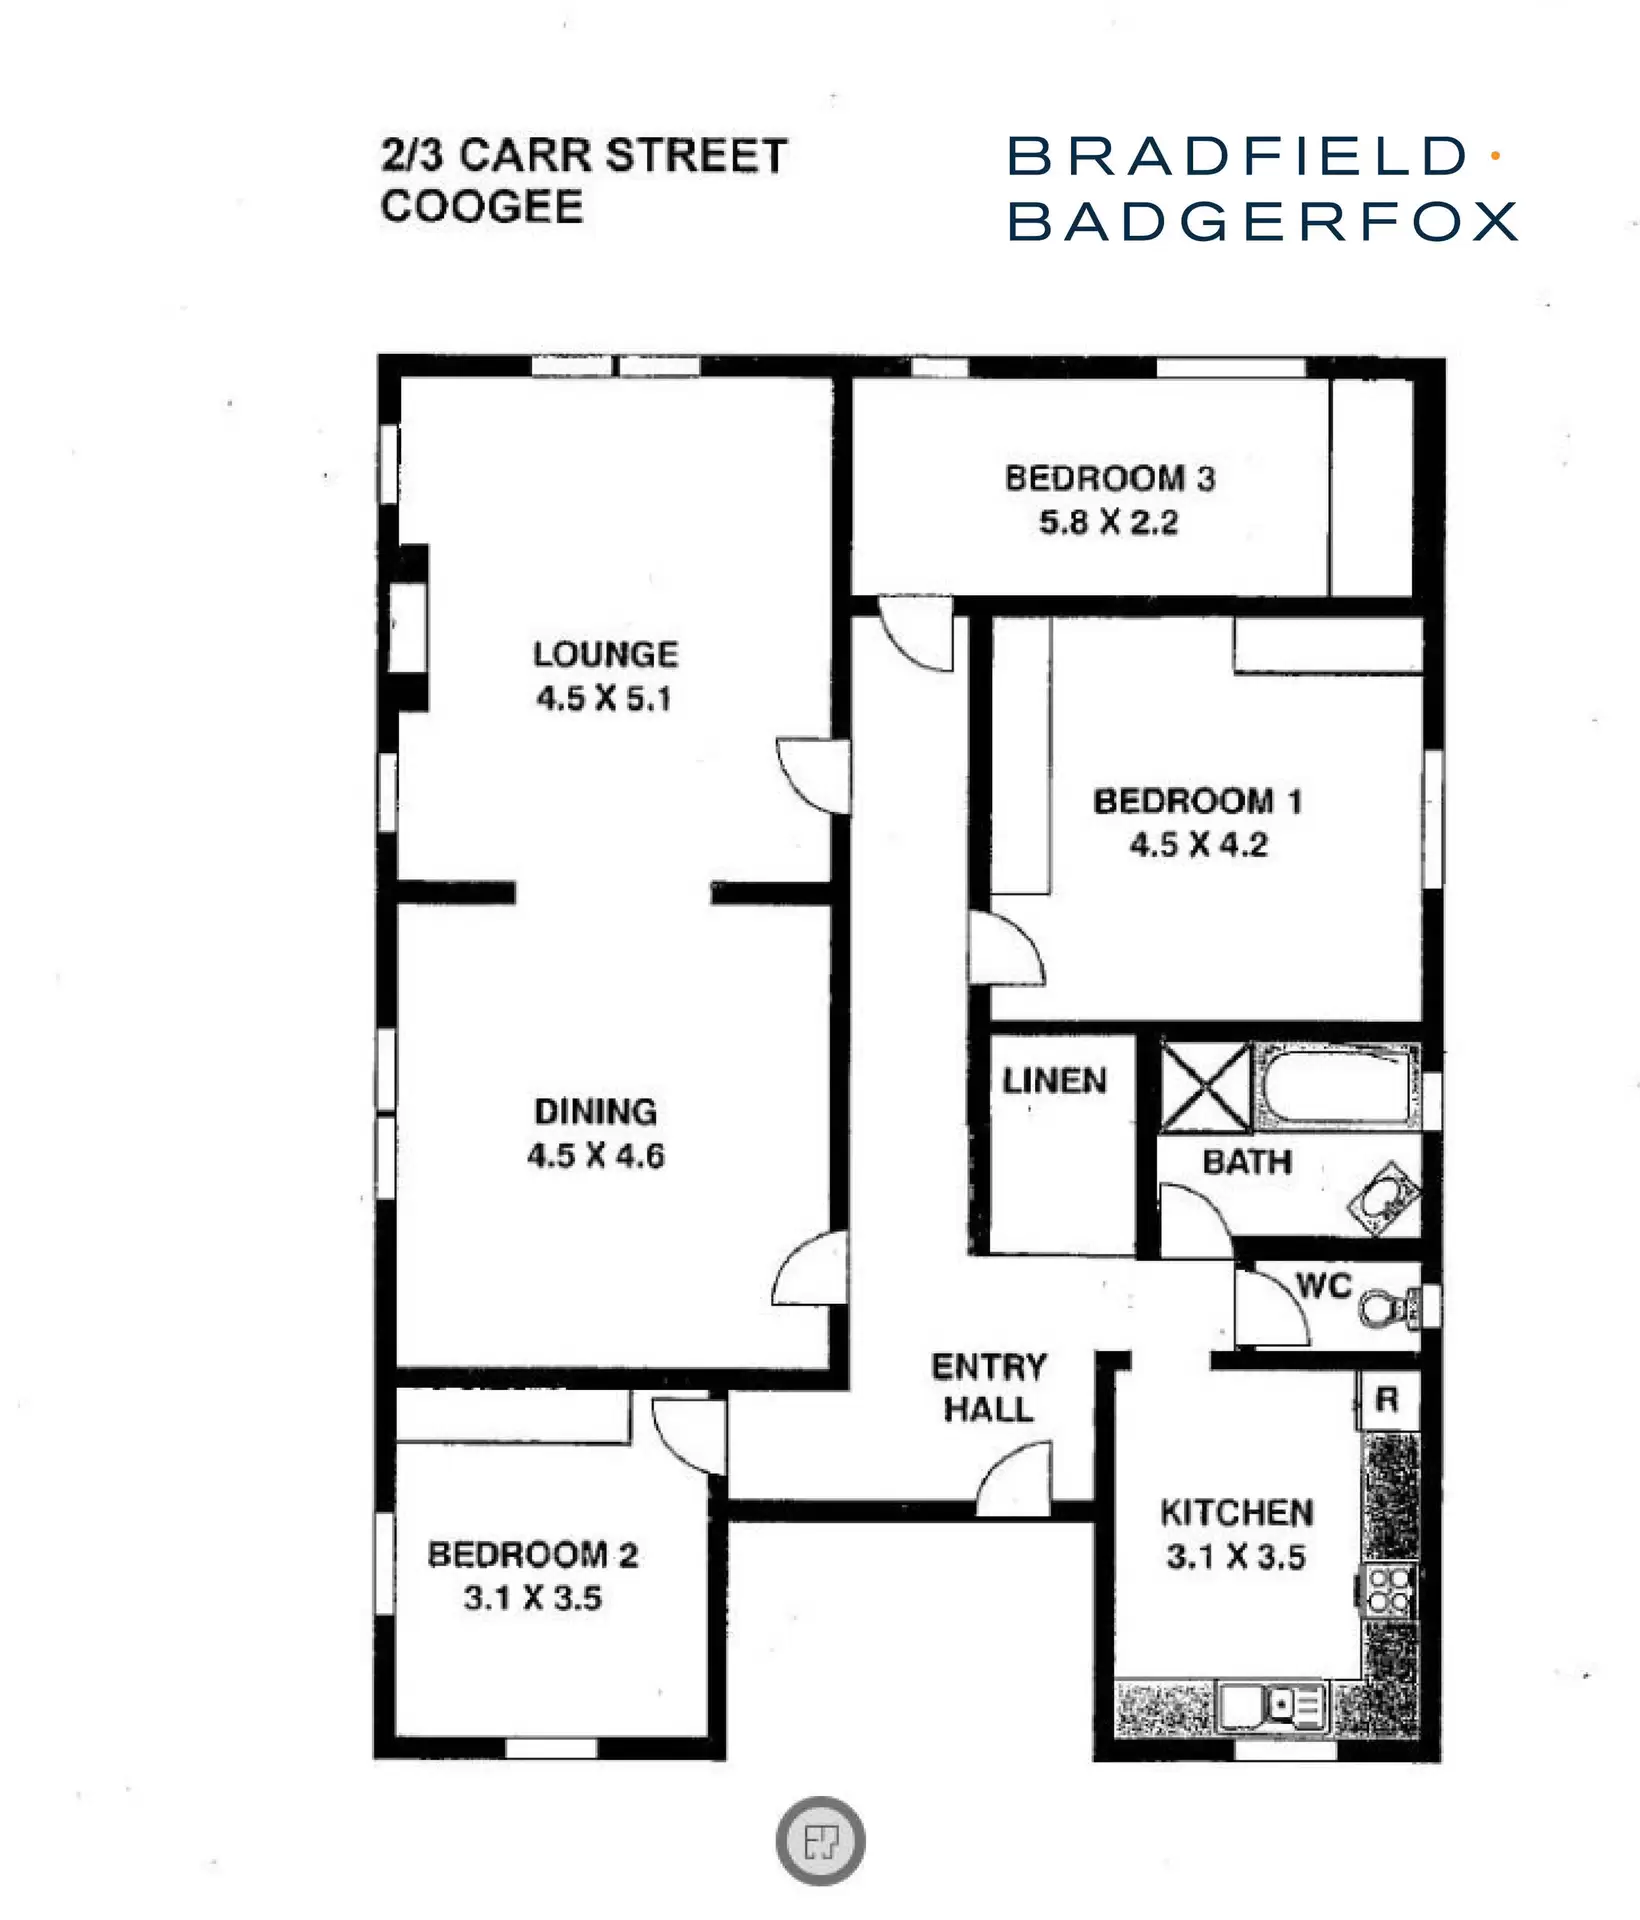 2/3 Carr Street, Coogee Leased by Bradfield Badgerfox - image 1